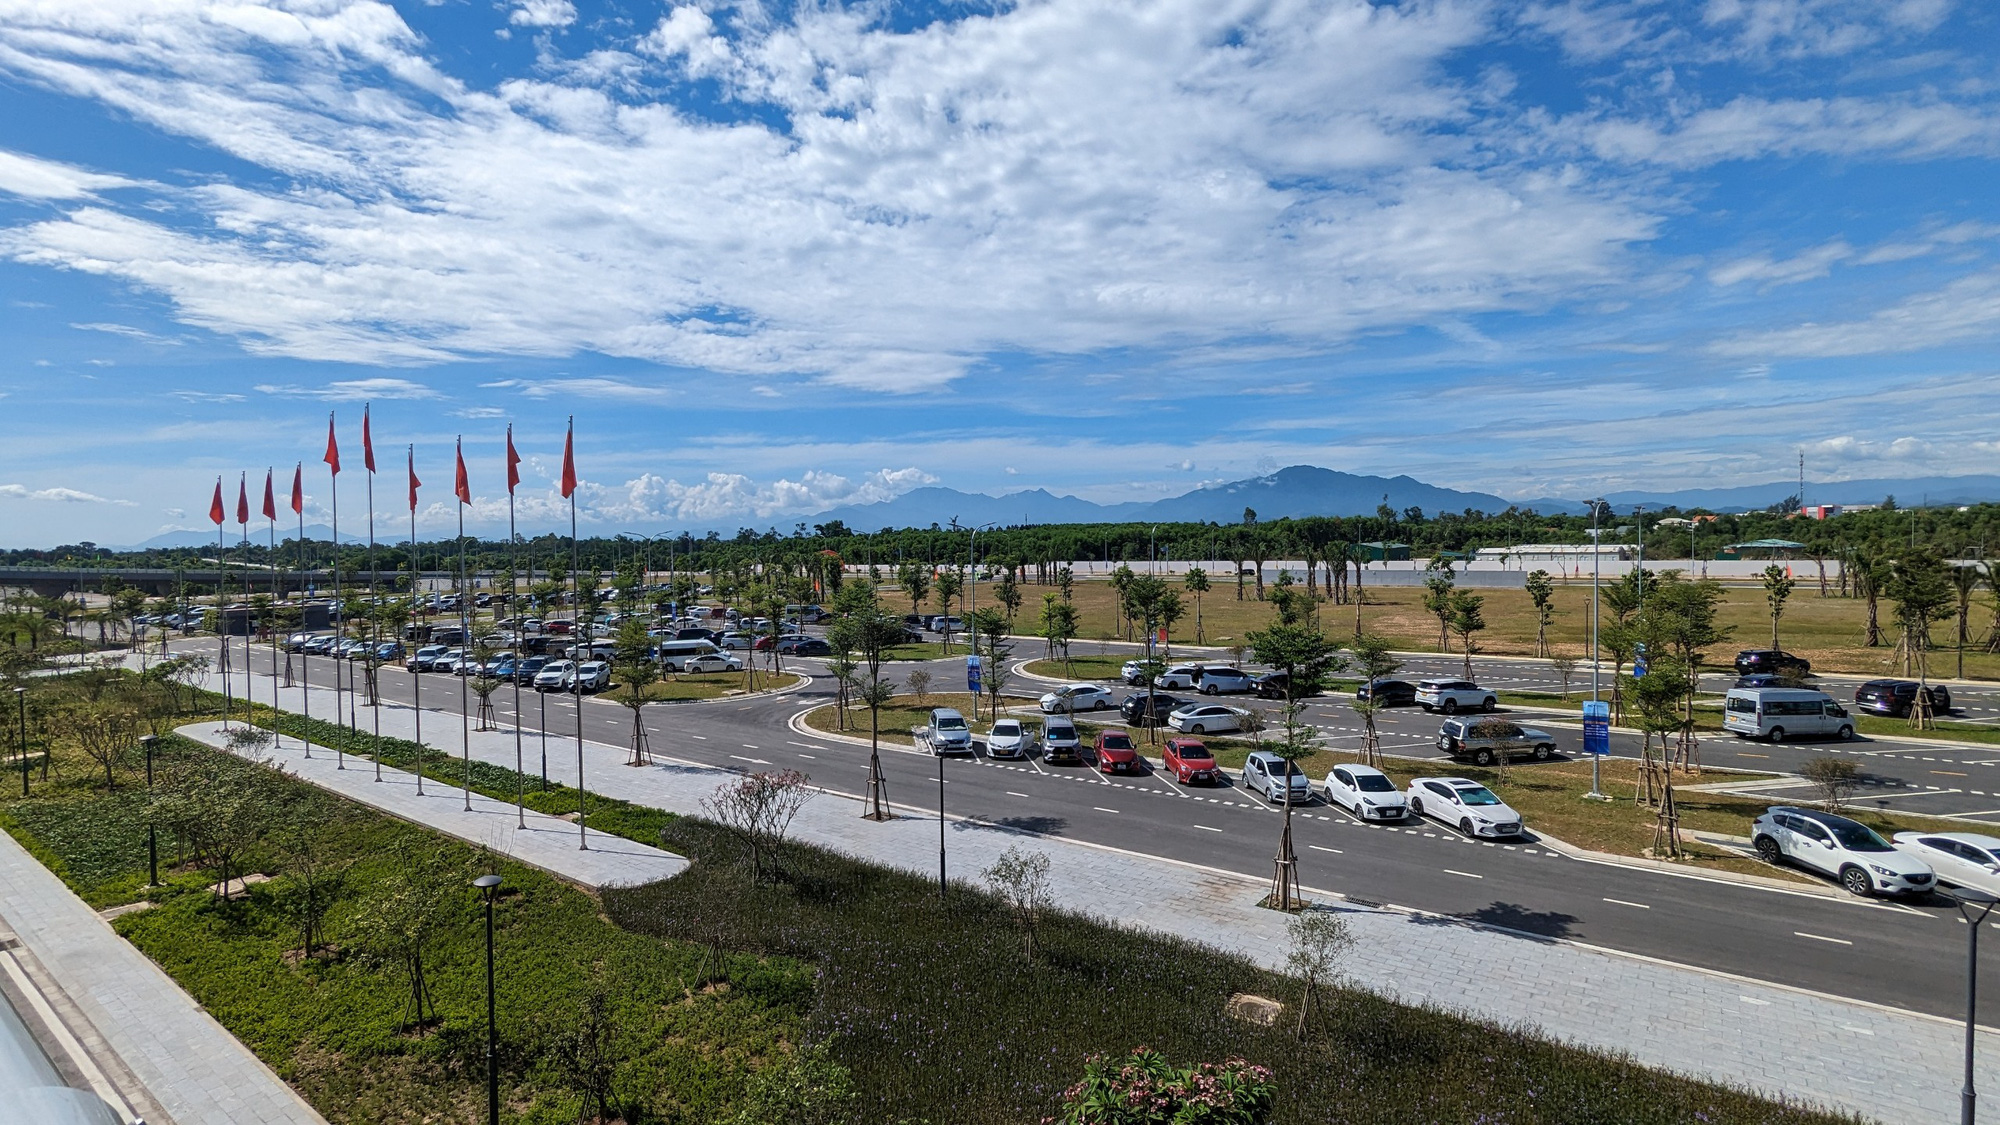 The parking lot at the T2 Terminal of Phu Bai International Airport in Thua Thien-Hue Province. Photo: Nhat Linh / Tuoi Tre